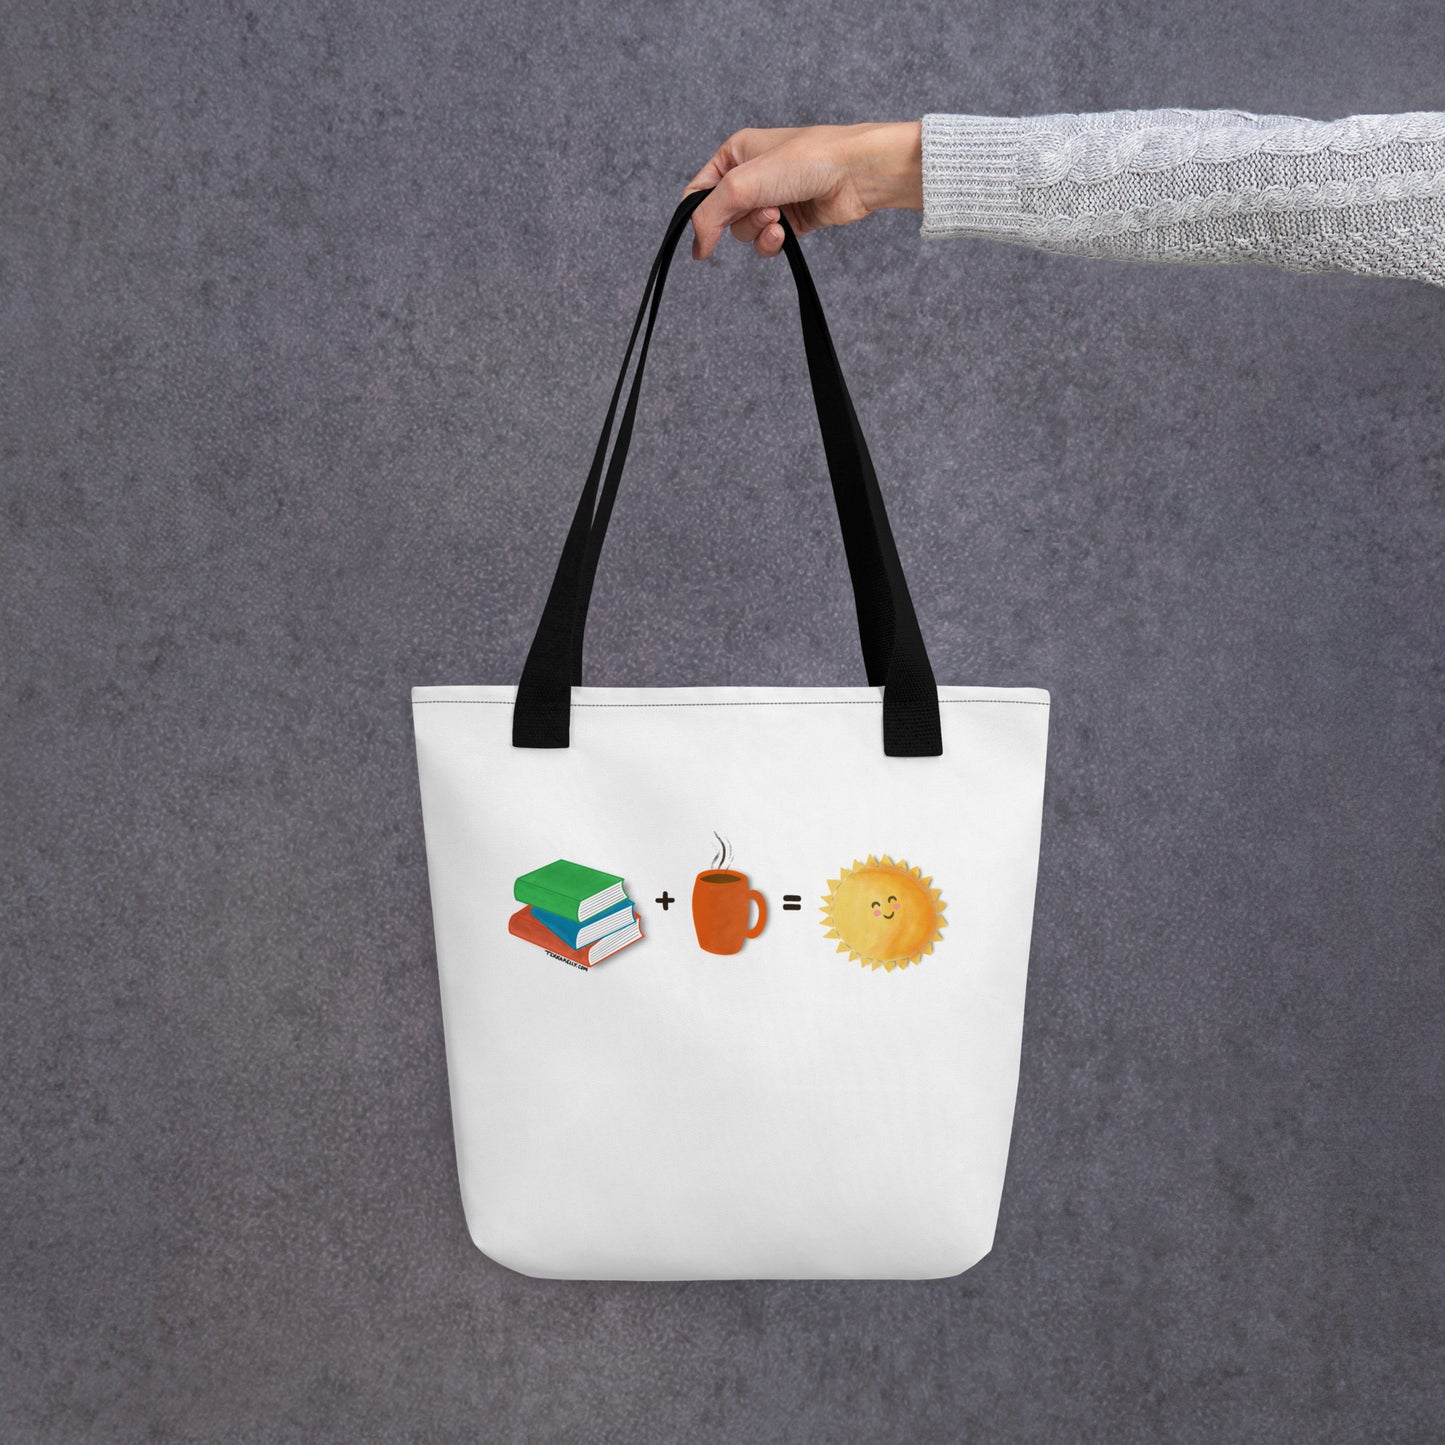 Books plus Coffee equals Happy Tote | Reusable Bag | FREE SHIPPING